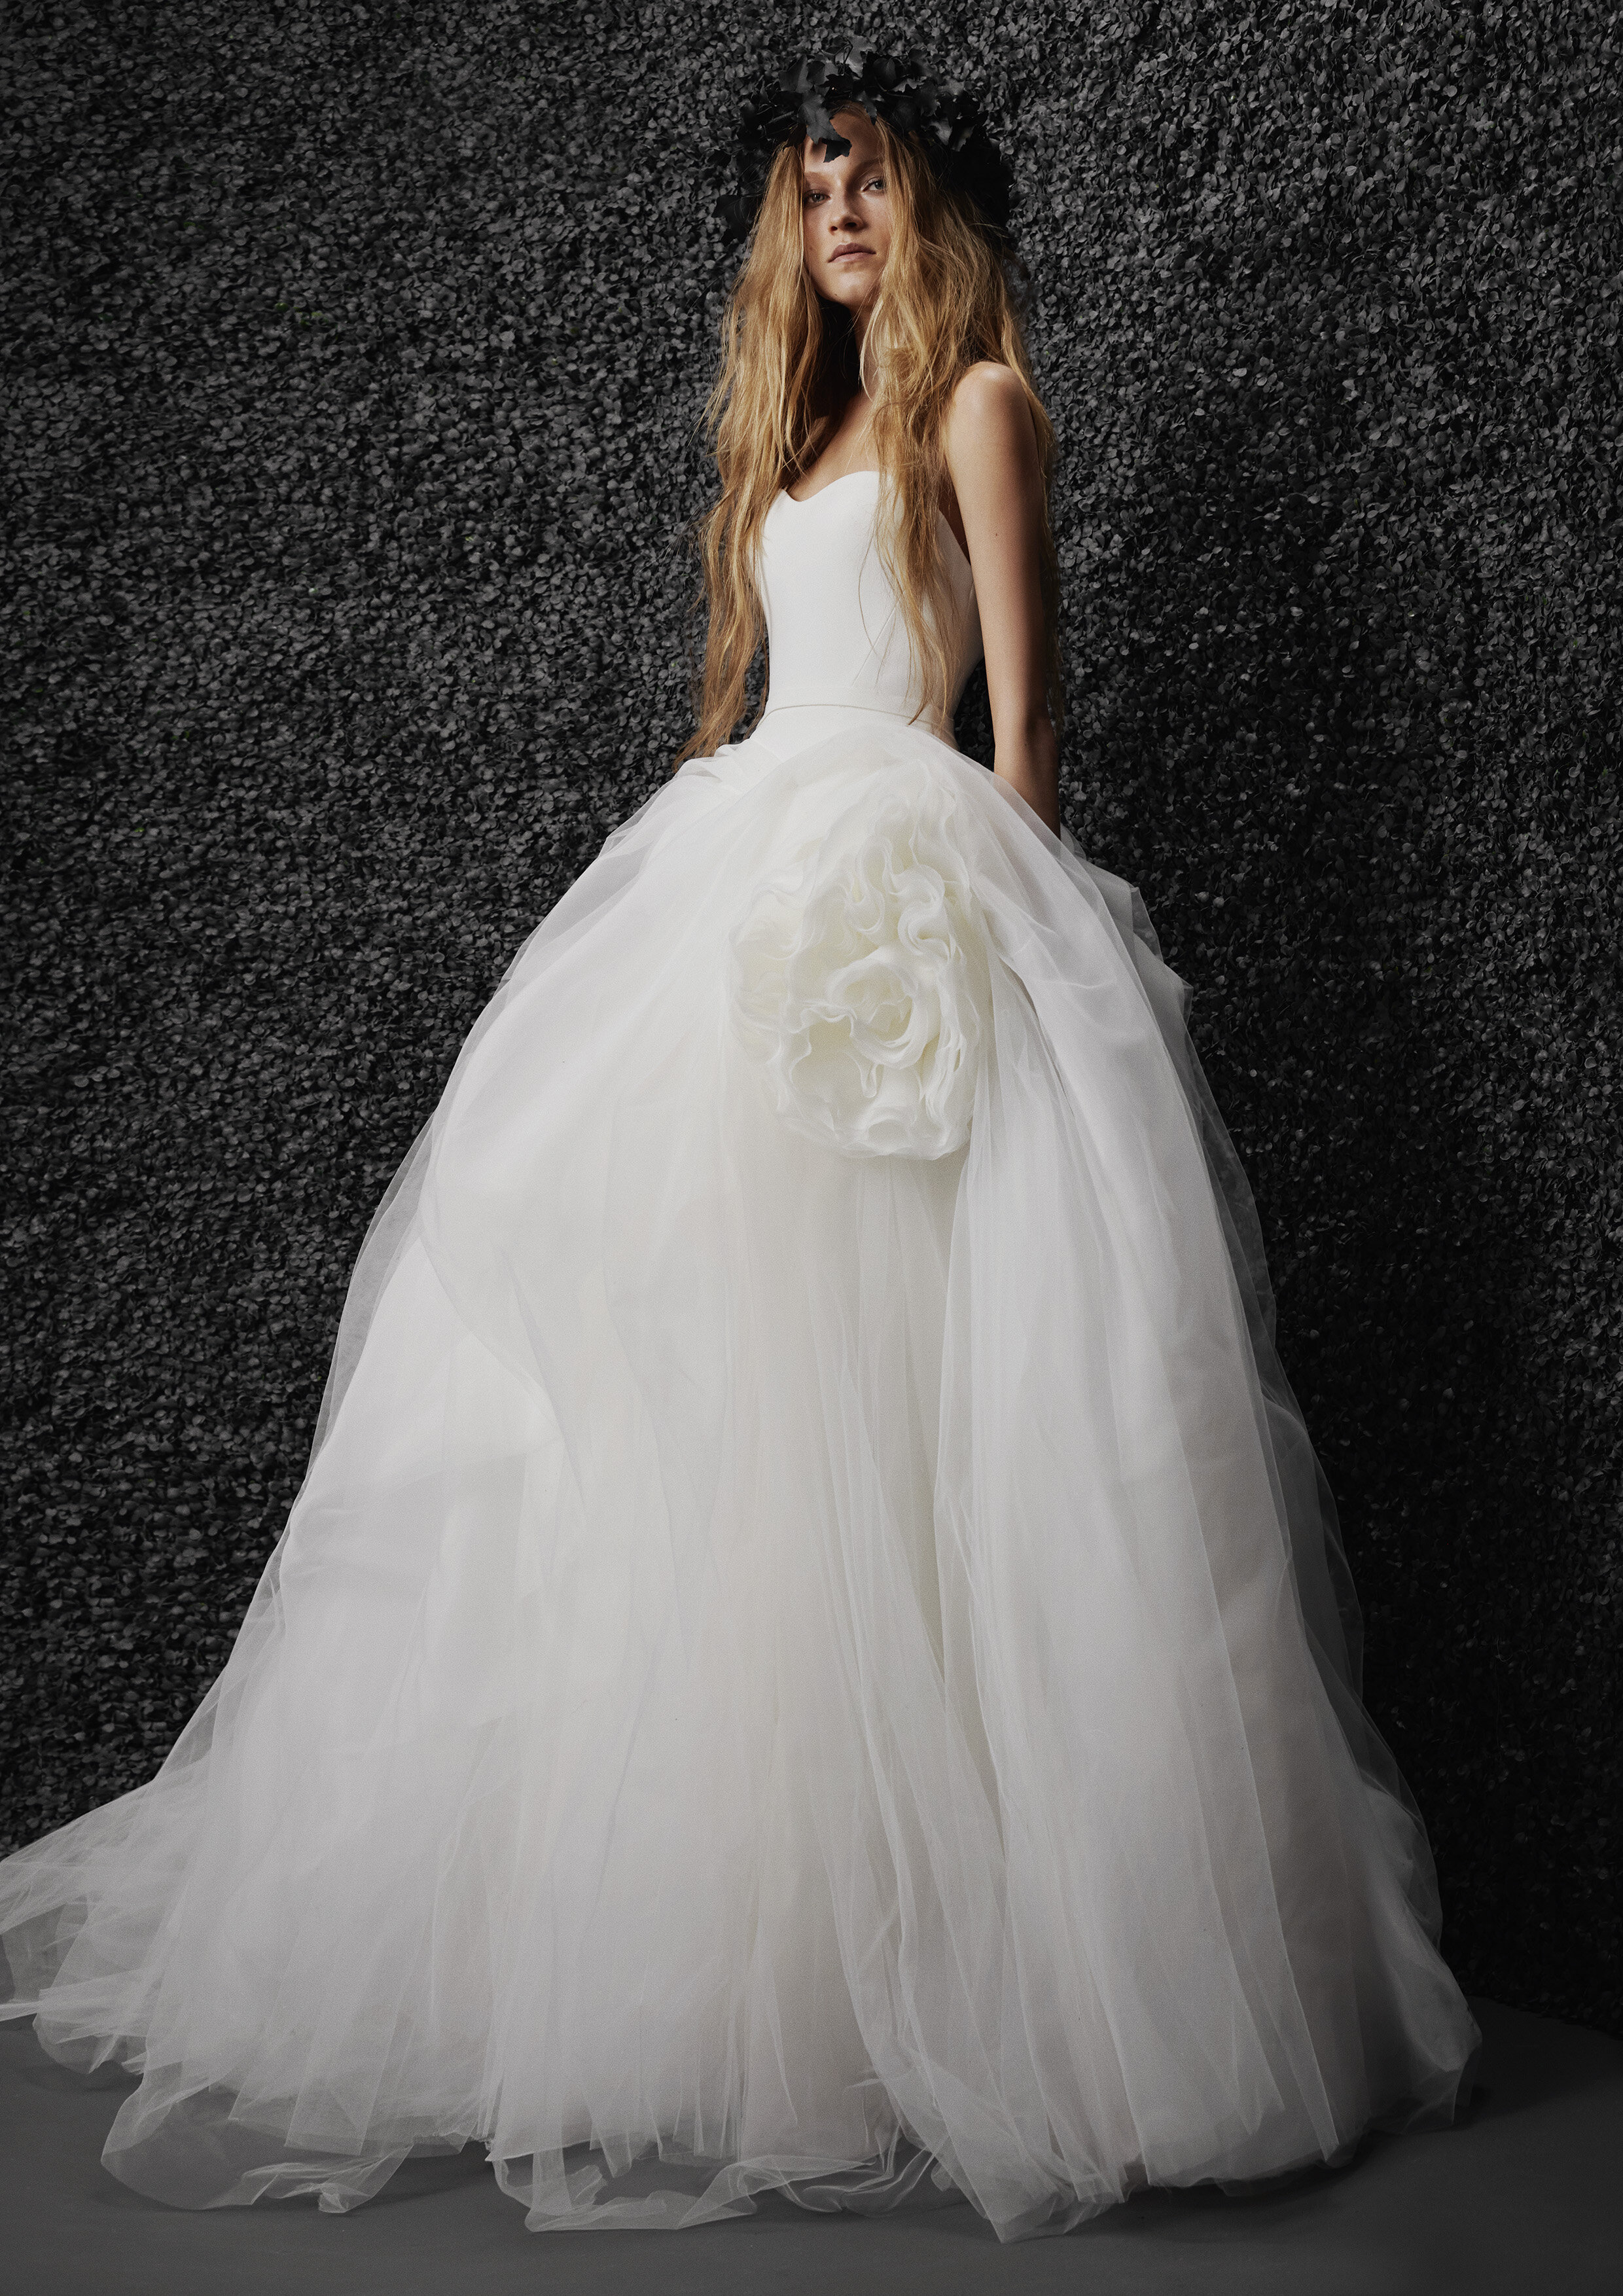 See Every Look From Vera Wang Bride 2022 - Vera Wang's New Collection with  Pronovias